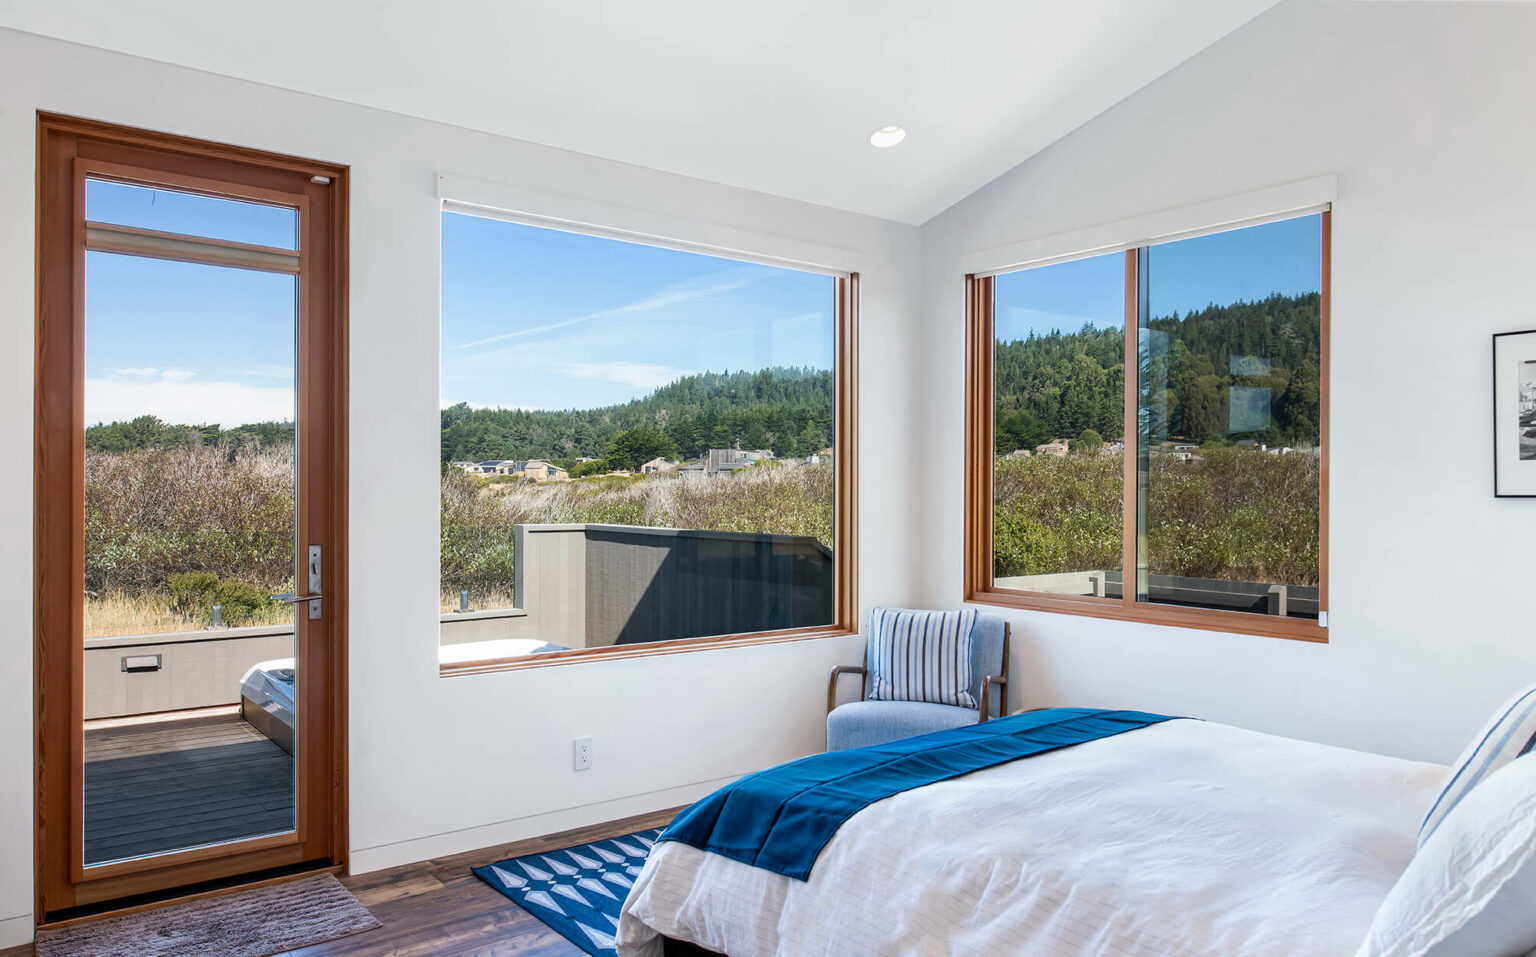 Beach Dreams bright white 1st queen bedroom with view of small deck looking to meadow